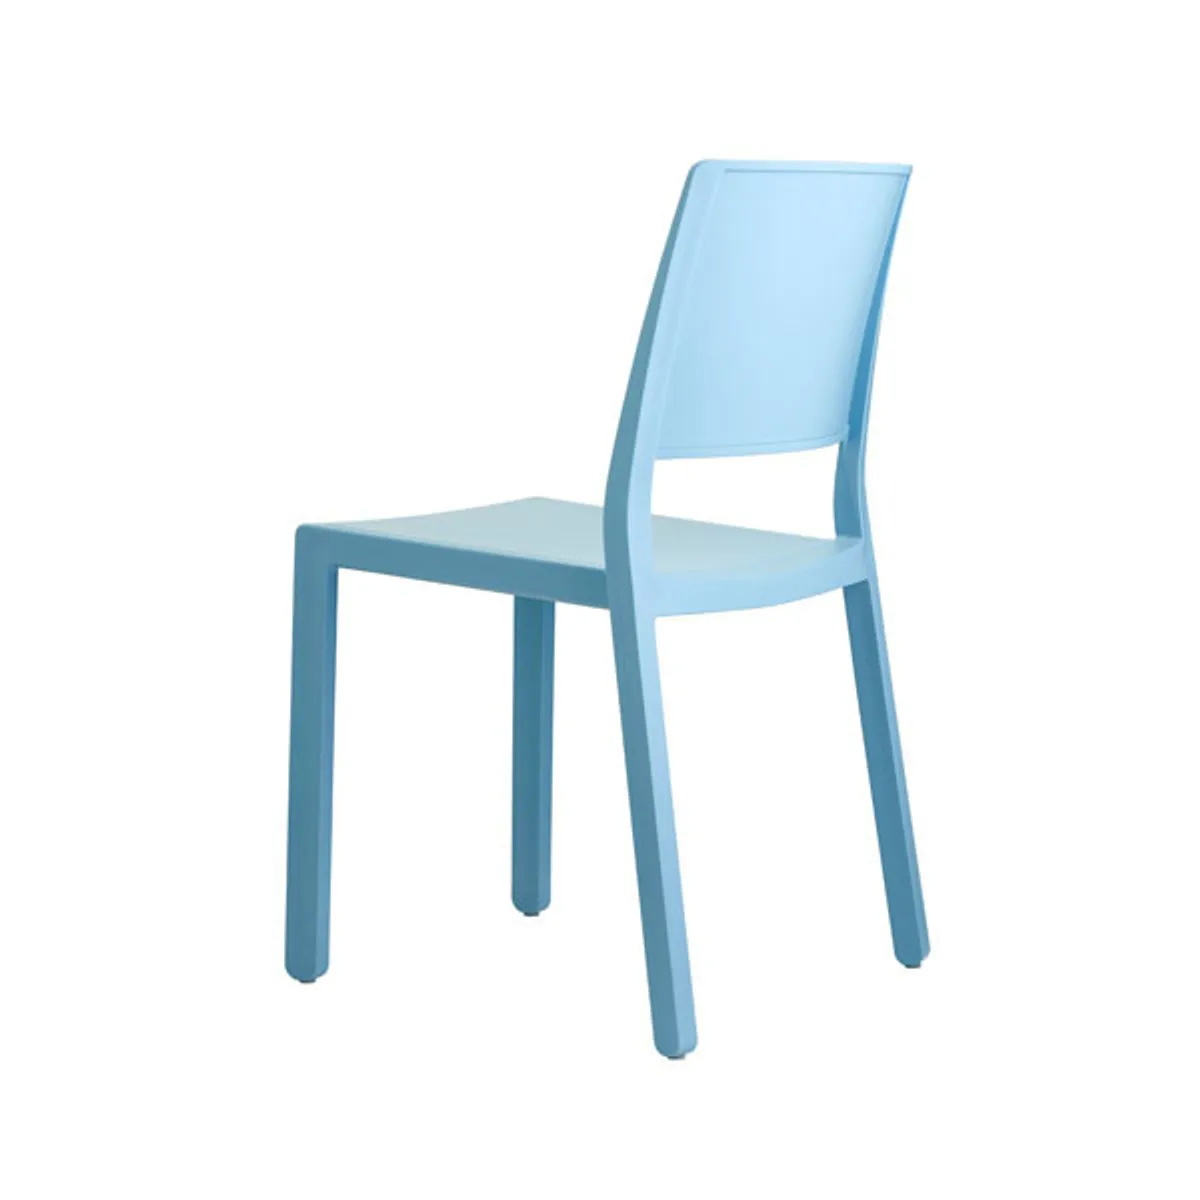 Remi side chair 4 Inside Out Contracts